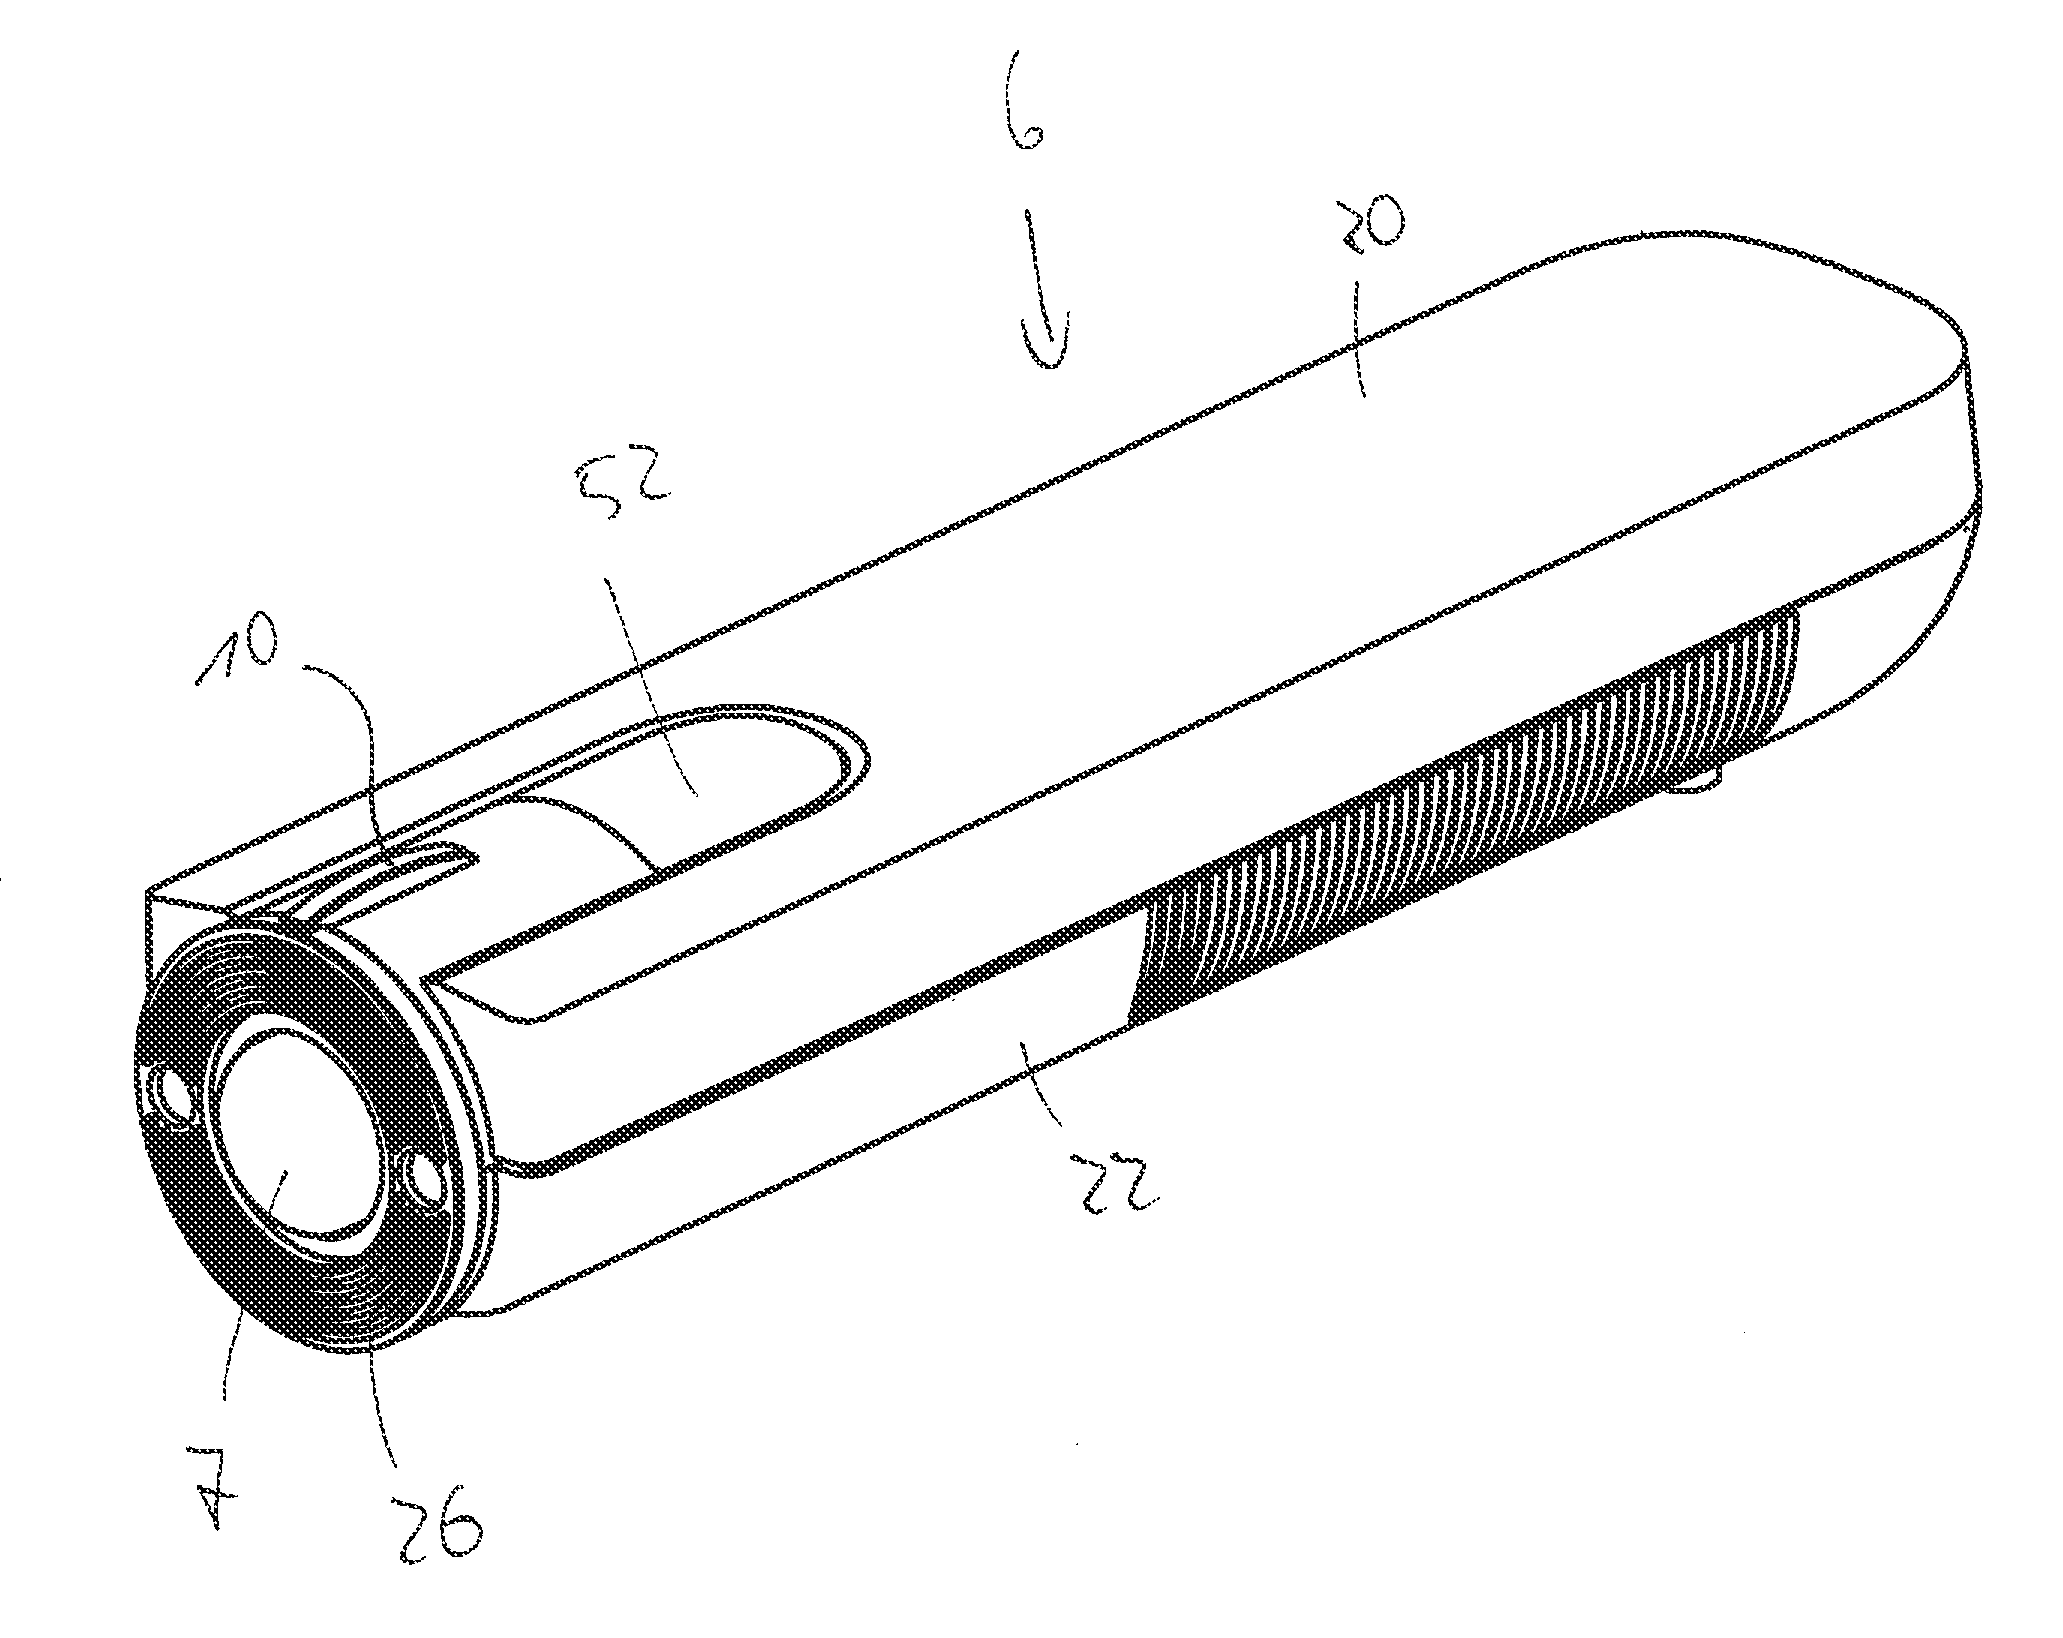 Device and method for measuring the level of a liquid within a container